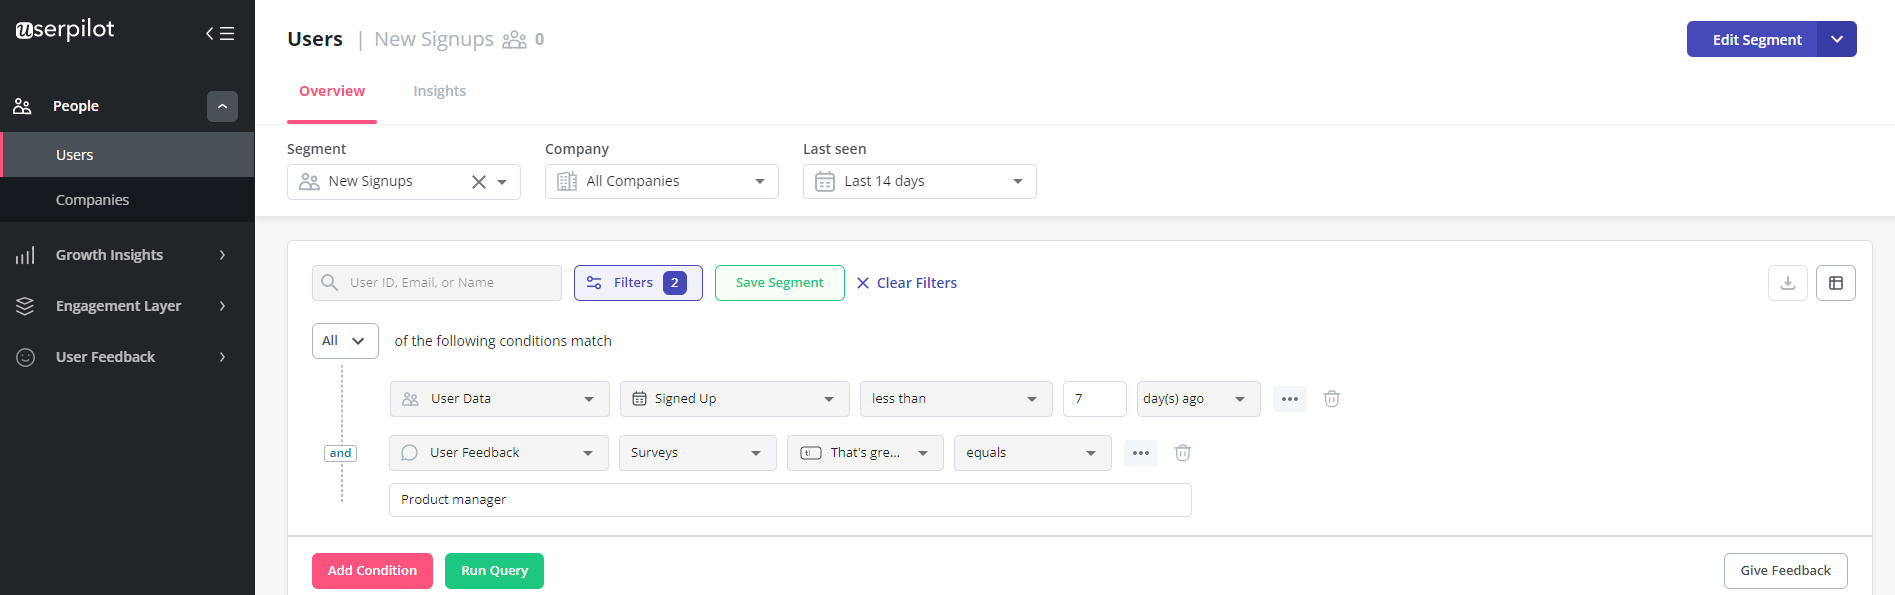 Create a personalized onboarding flow for different segments